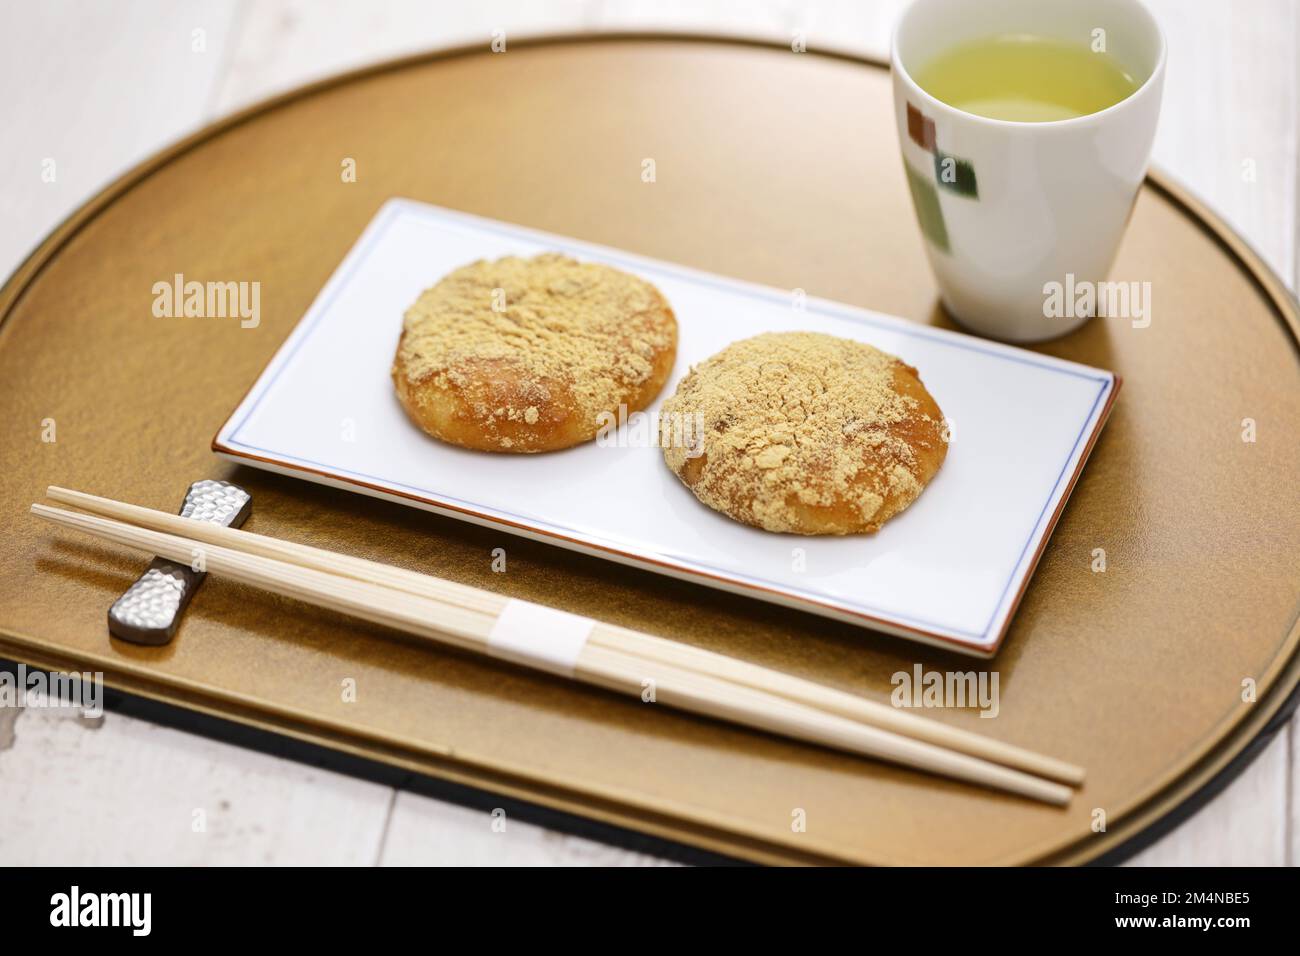 Kinako Mochi ( rice cakes coated with mixed powder roasted soybean flour and sugar), a Japanese traditional dessert Stock Photo